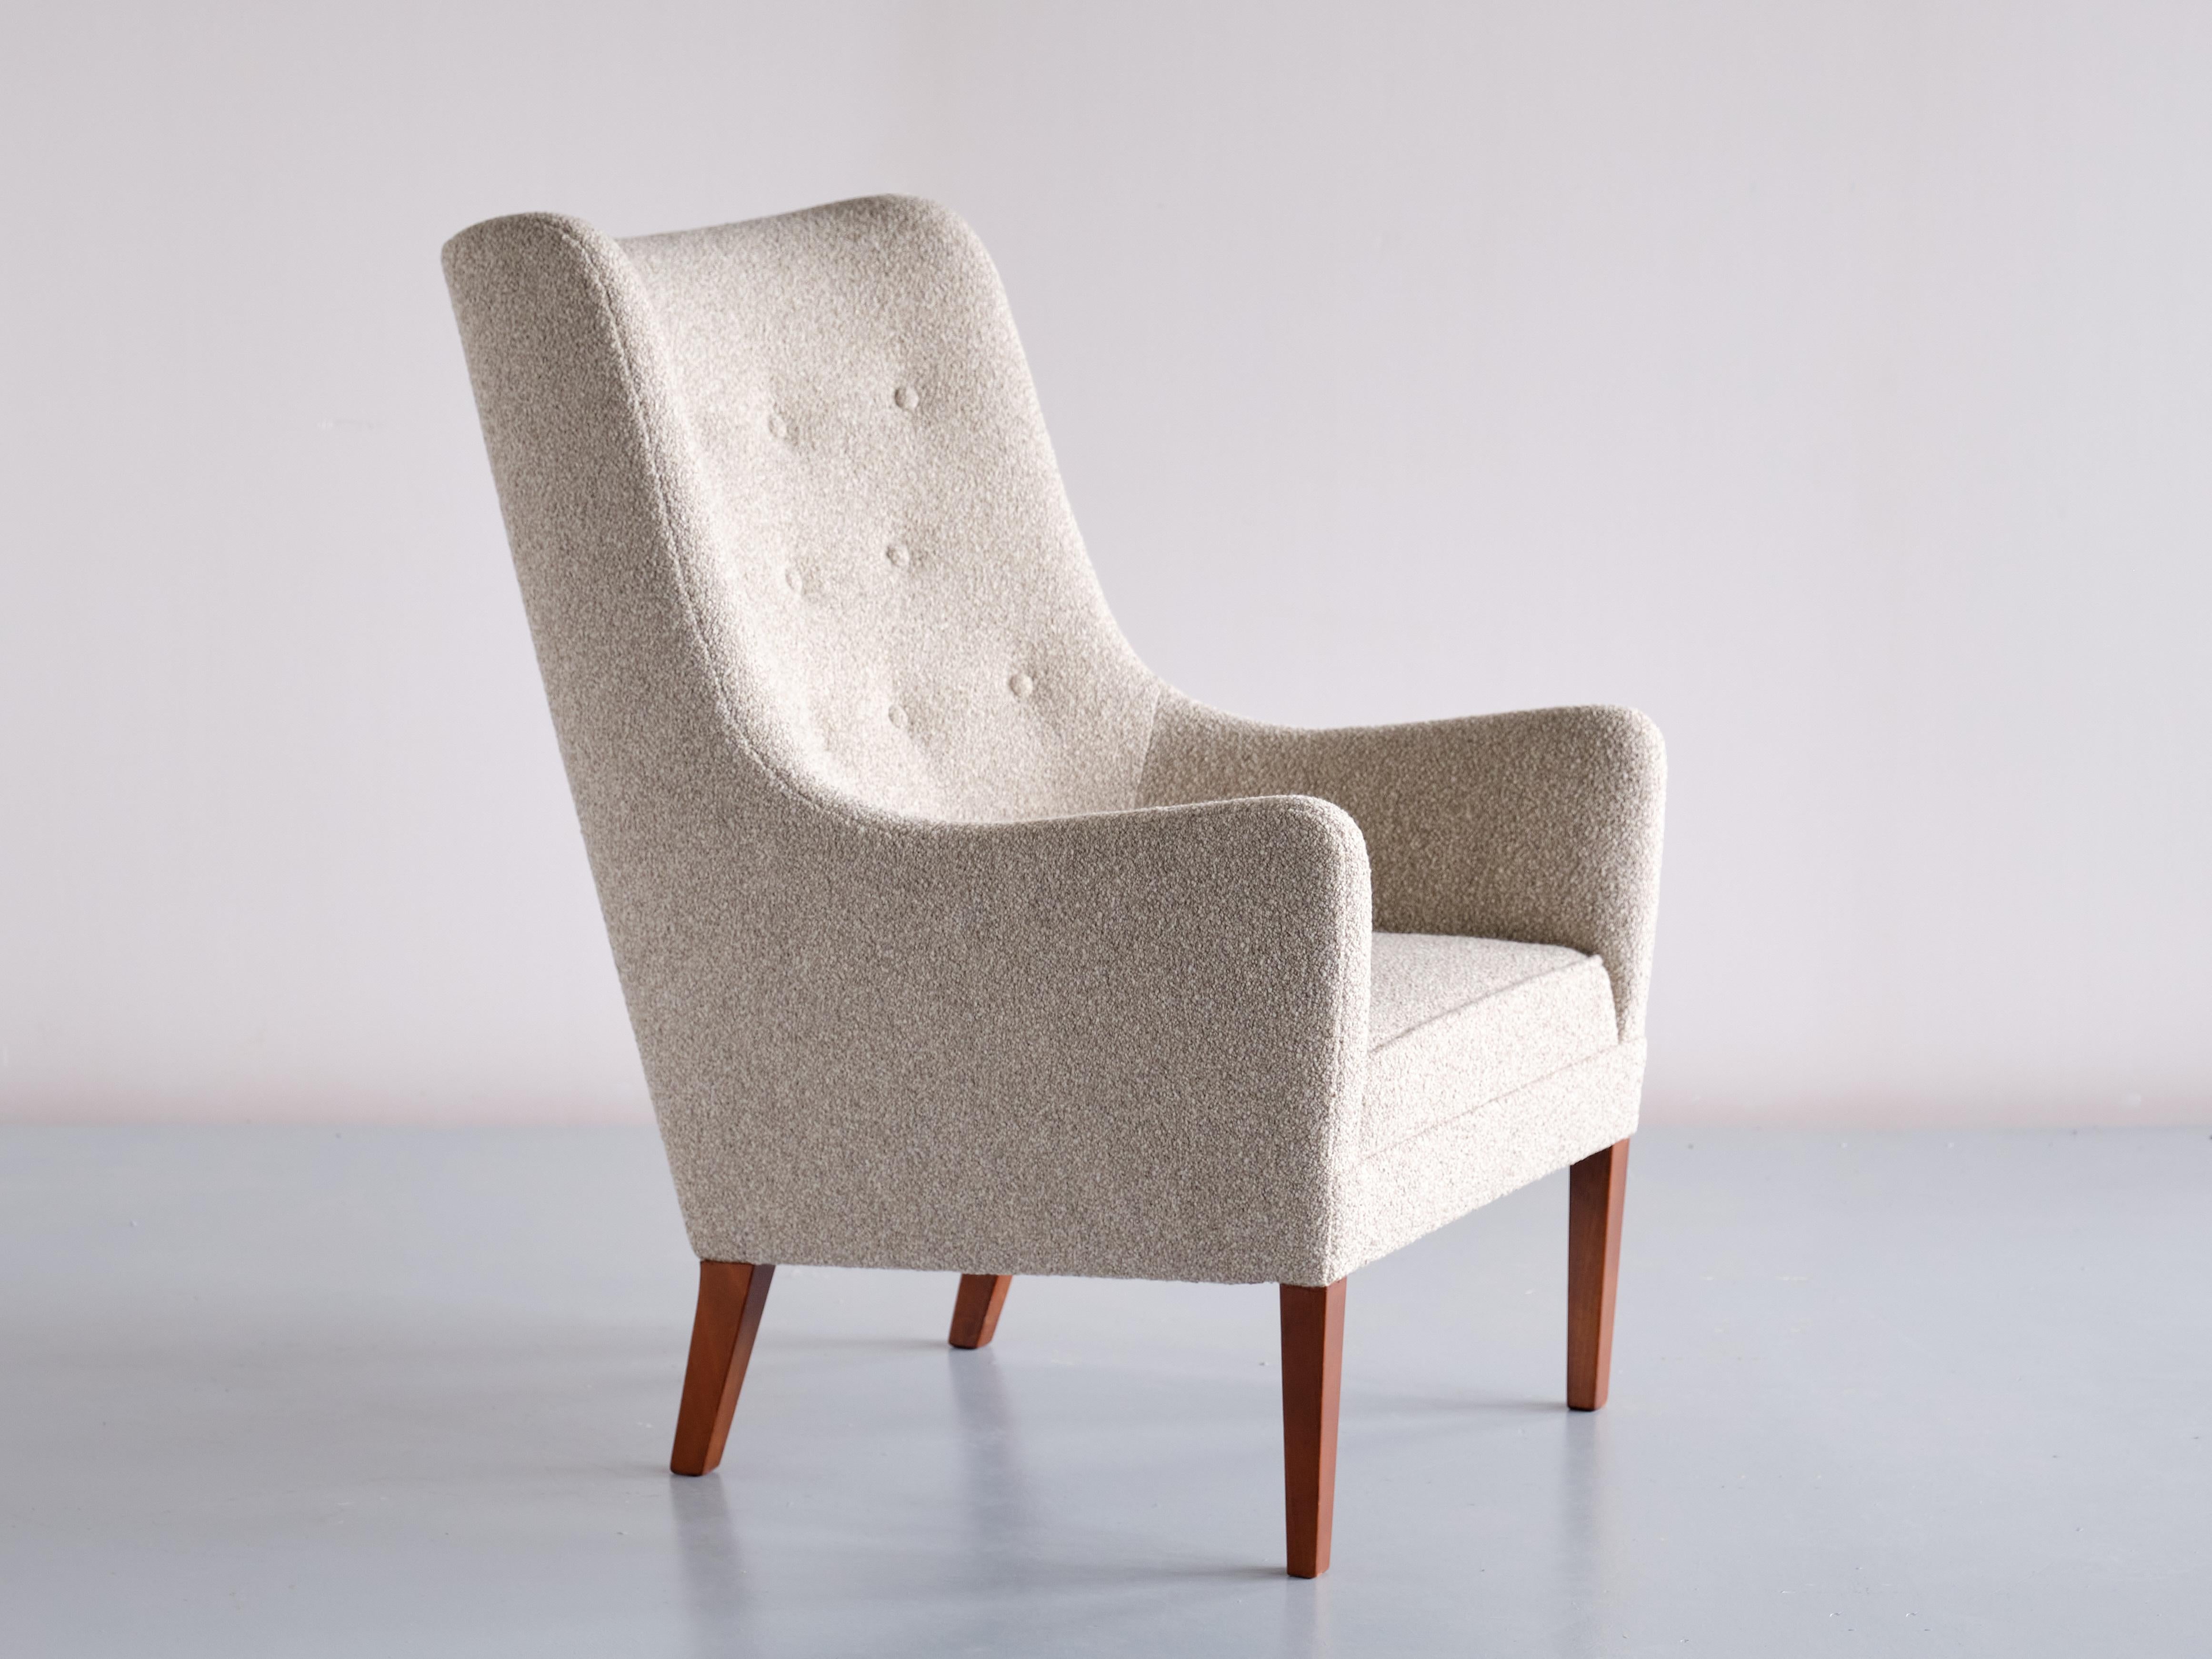 Pair of Jacob Kjær High Back Armchairs in Bouclé and Mahogany, Denmark, 1940s For Sale 3